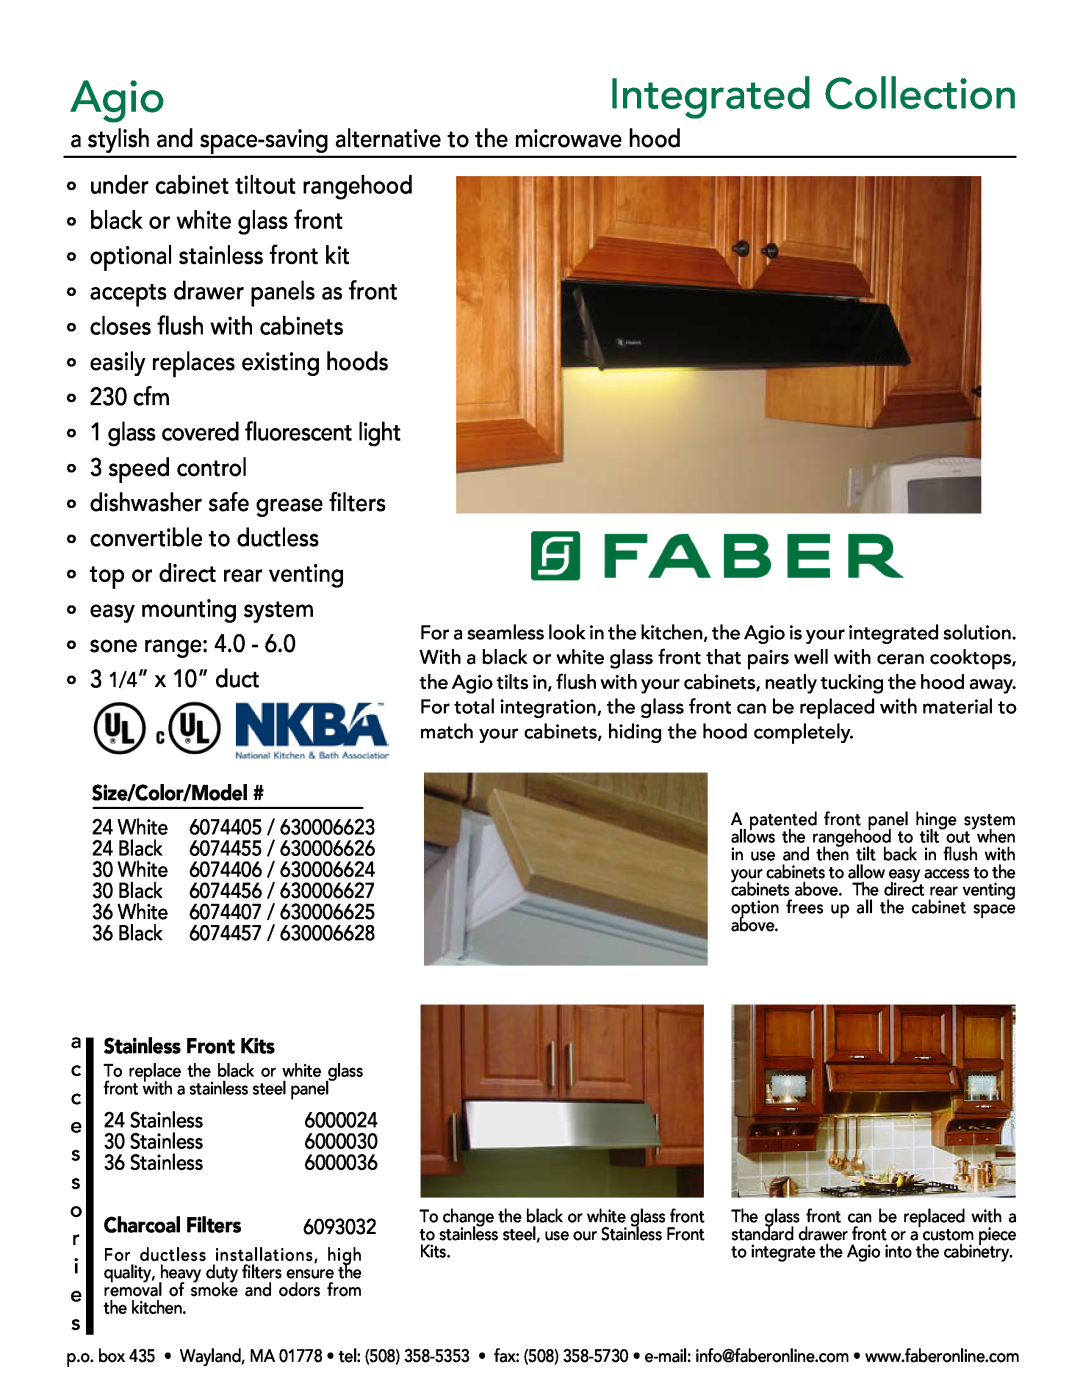 Faber 6074455/630006626 manual black or white glass front, optional stainless front kit, closes flush with cabinets 